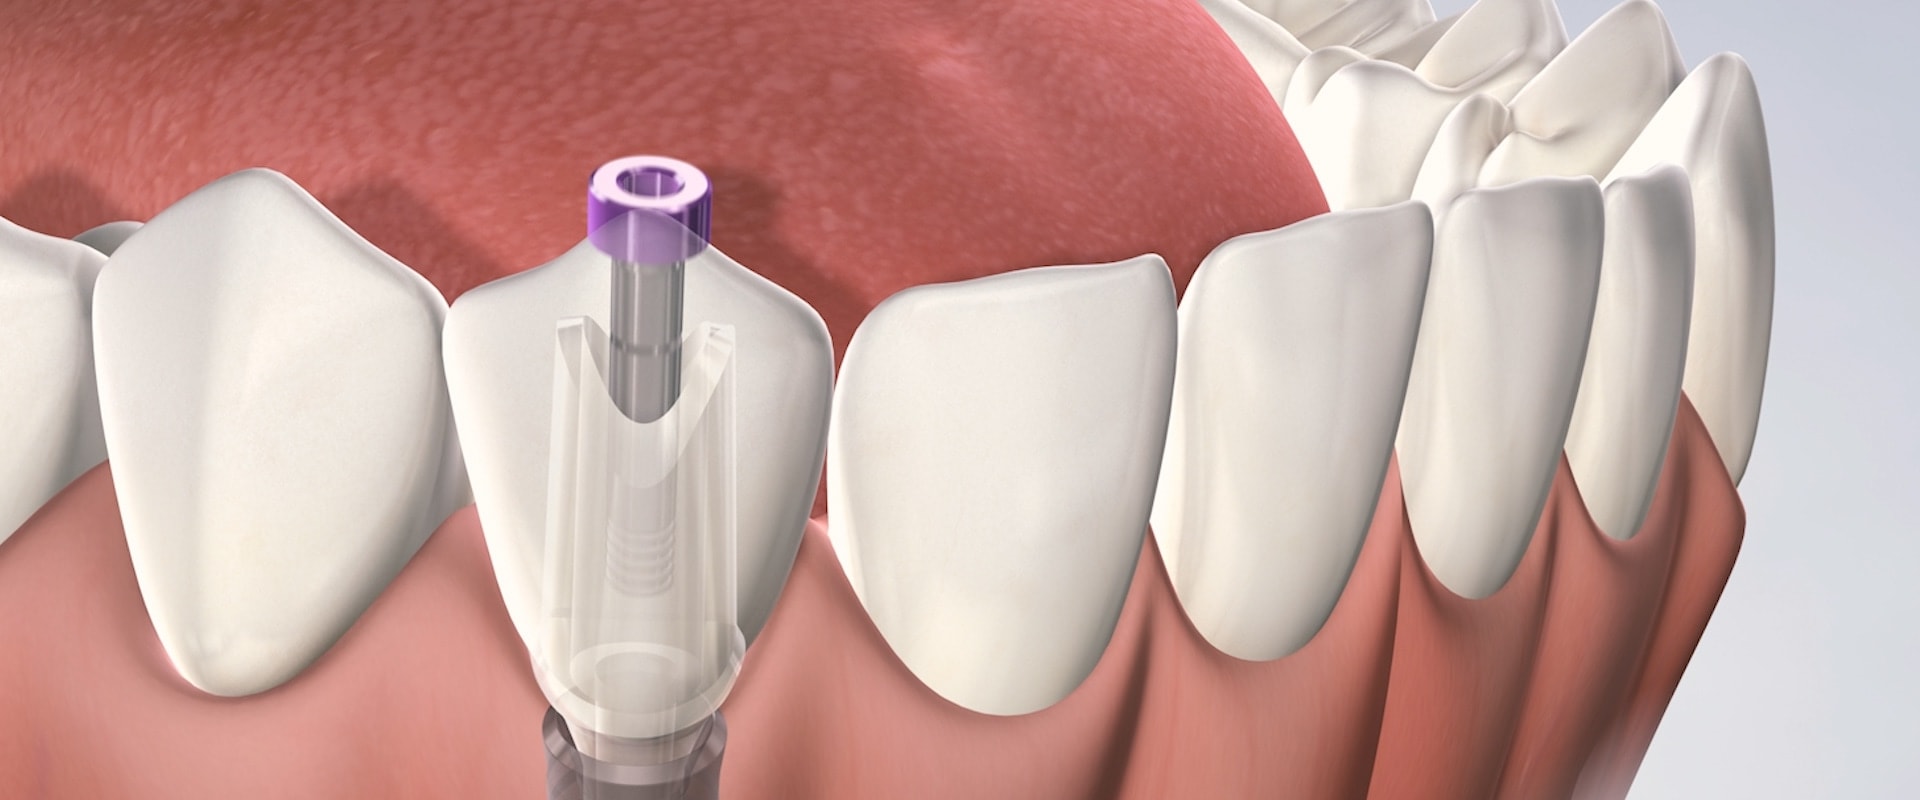 Why dental implants are so expensive?